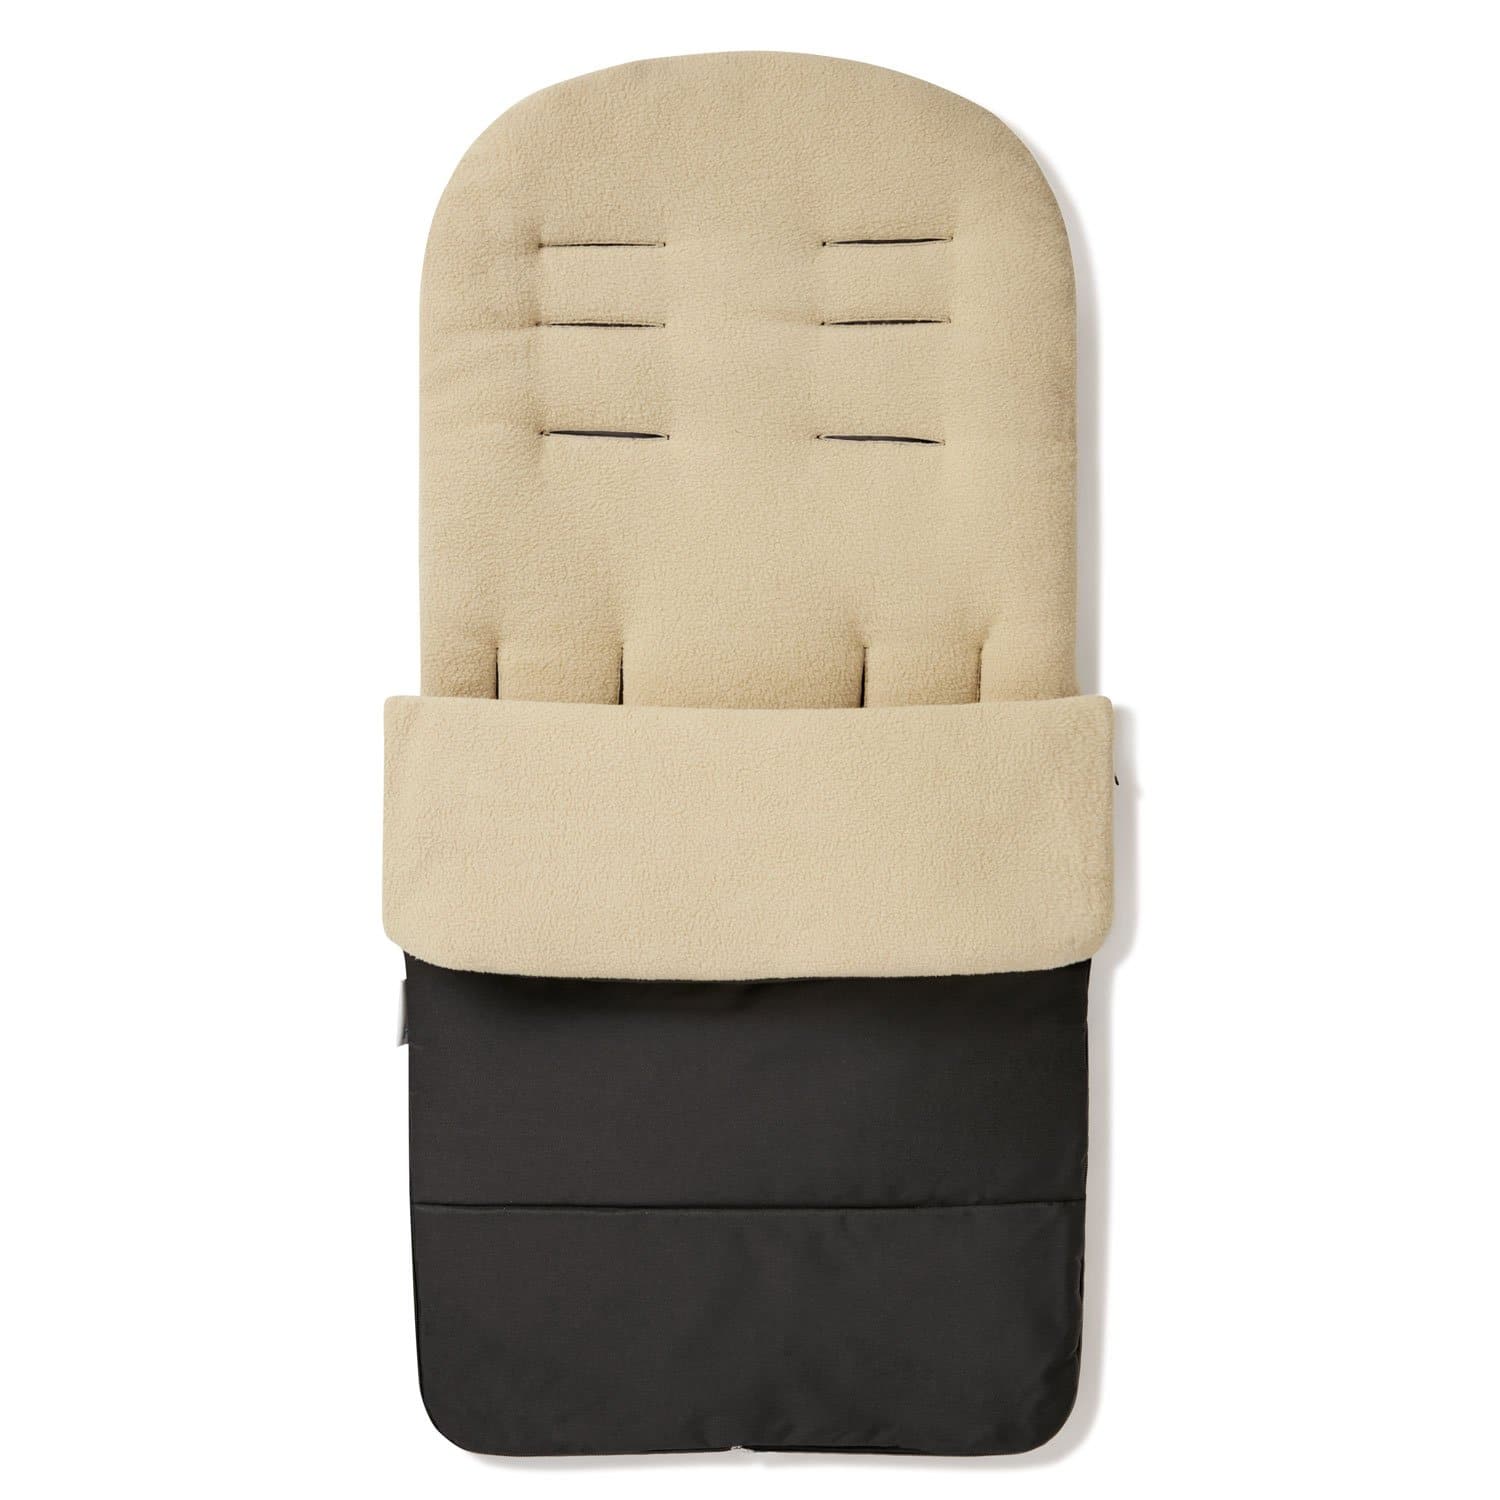 Universal Premium Pushchair Footmuff / Cosy Toes - Fits All Pushchairs / Prams And Buggies - For Your Little One